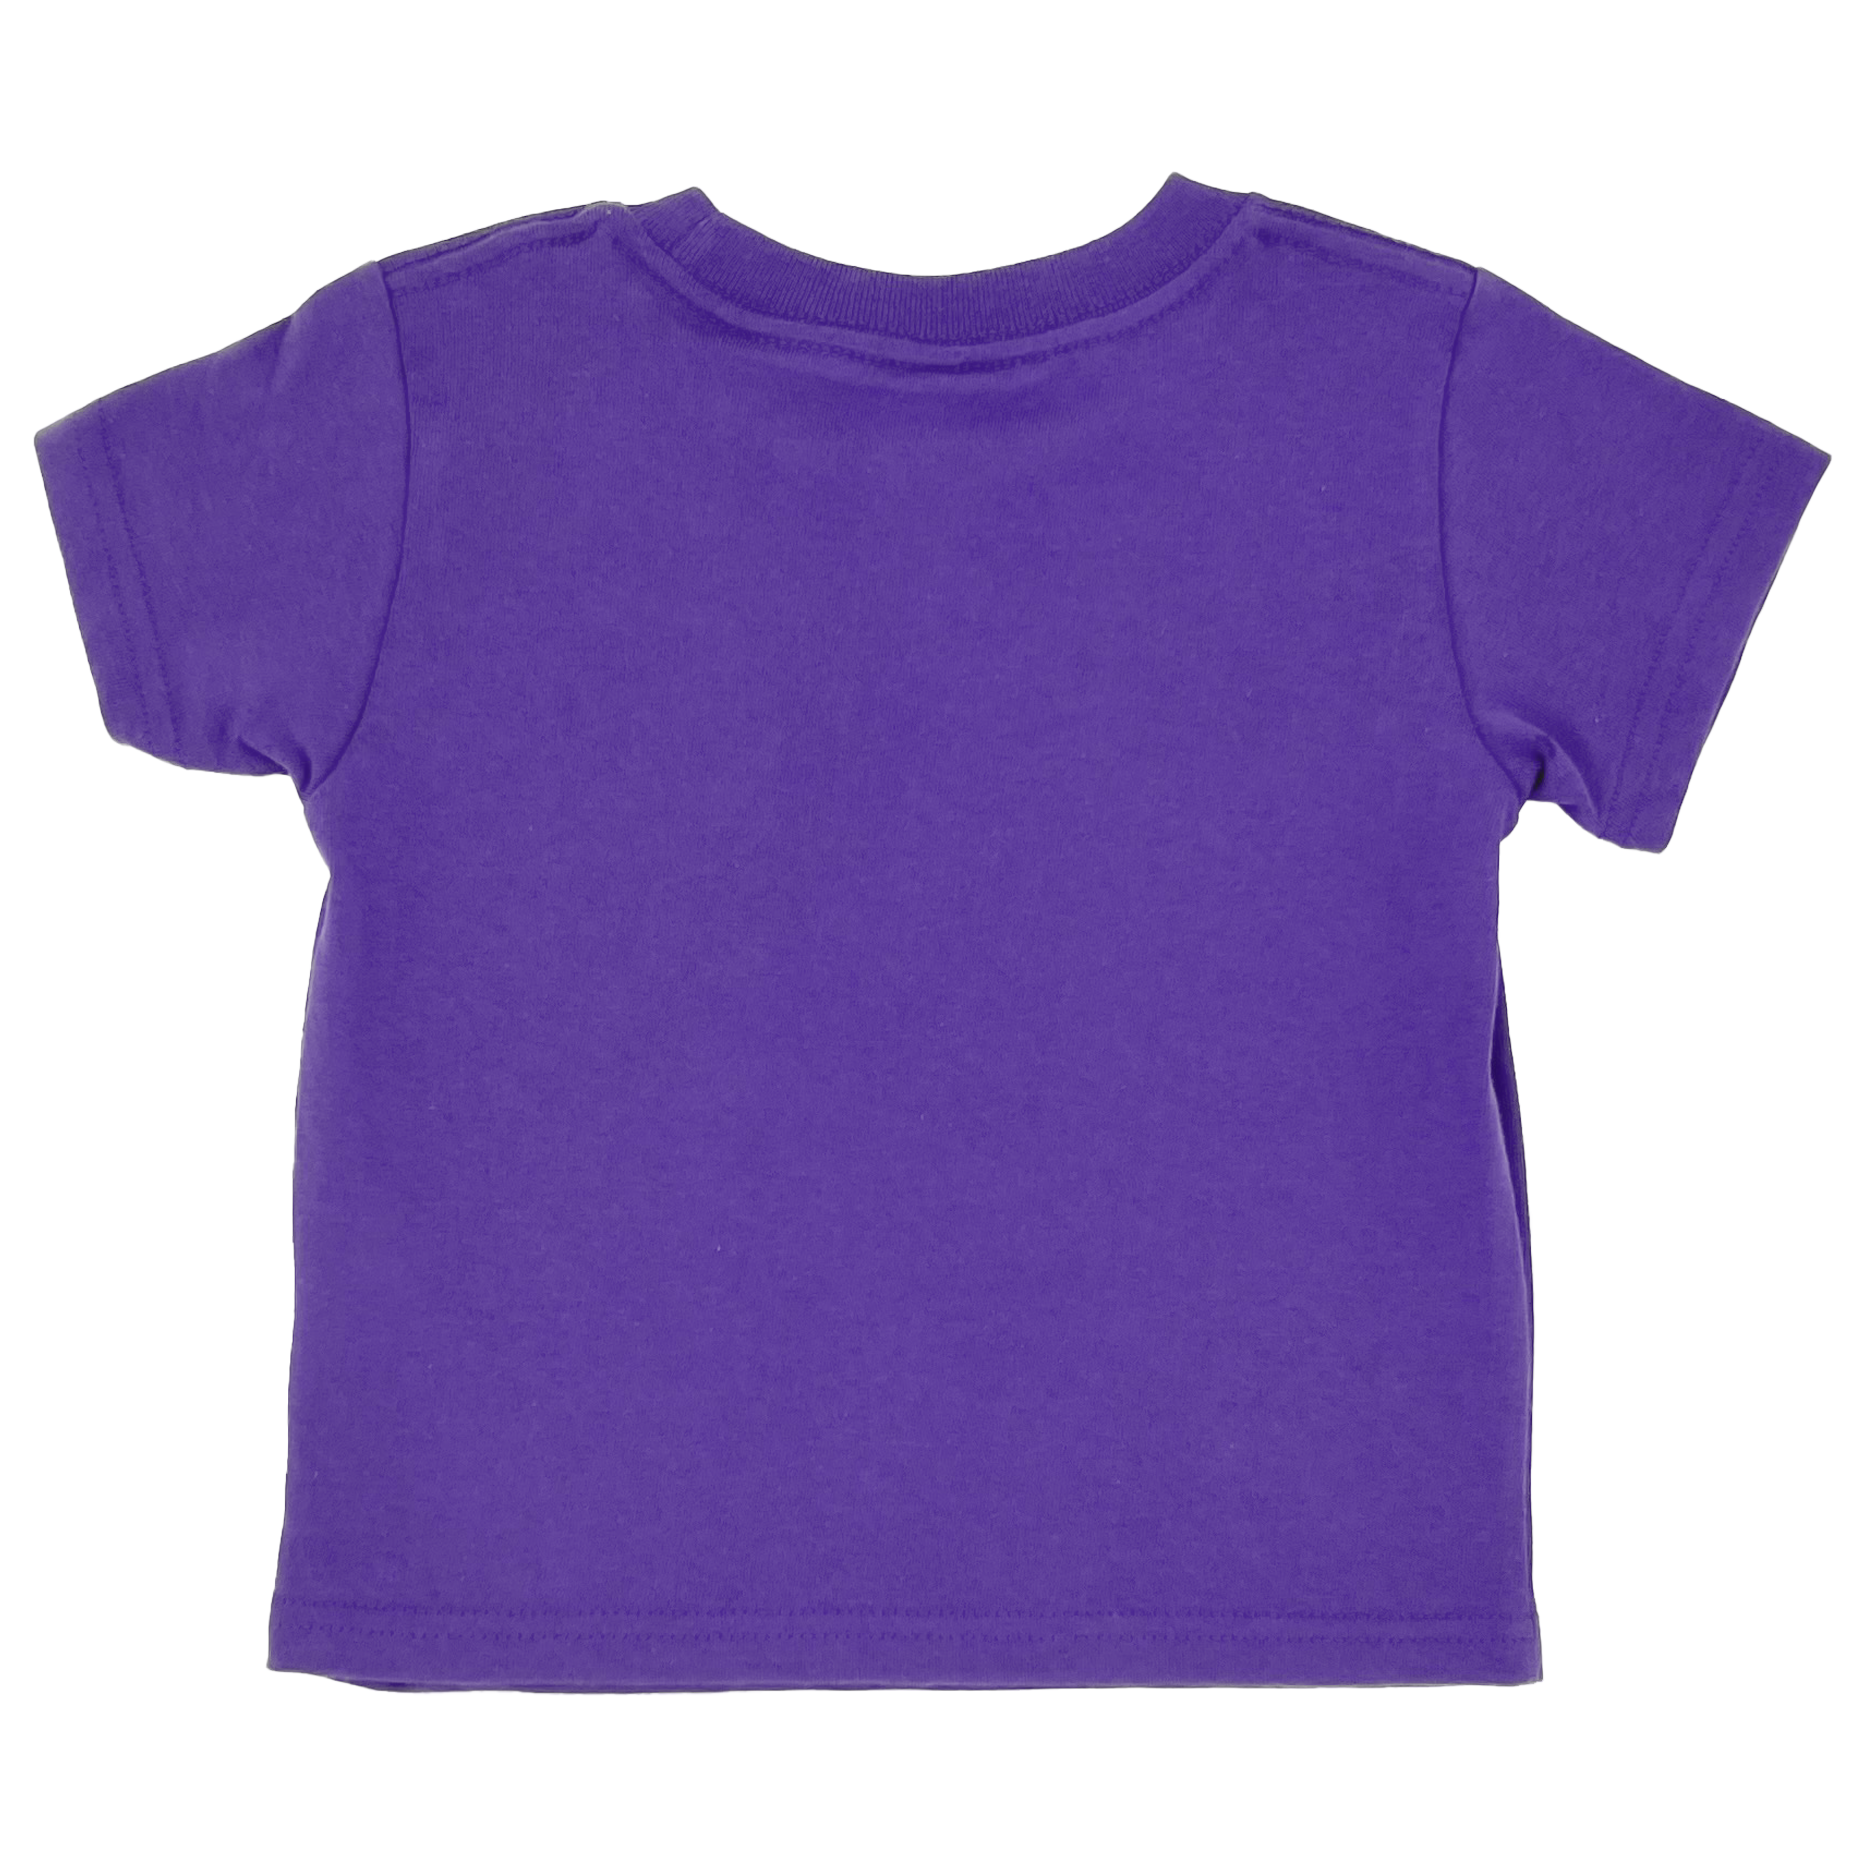 Back view of a purple toddler shirt.